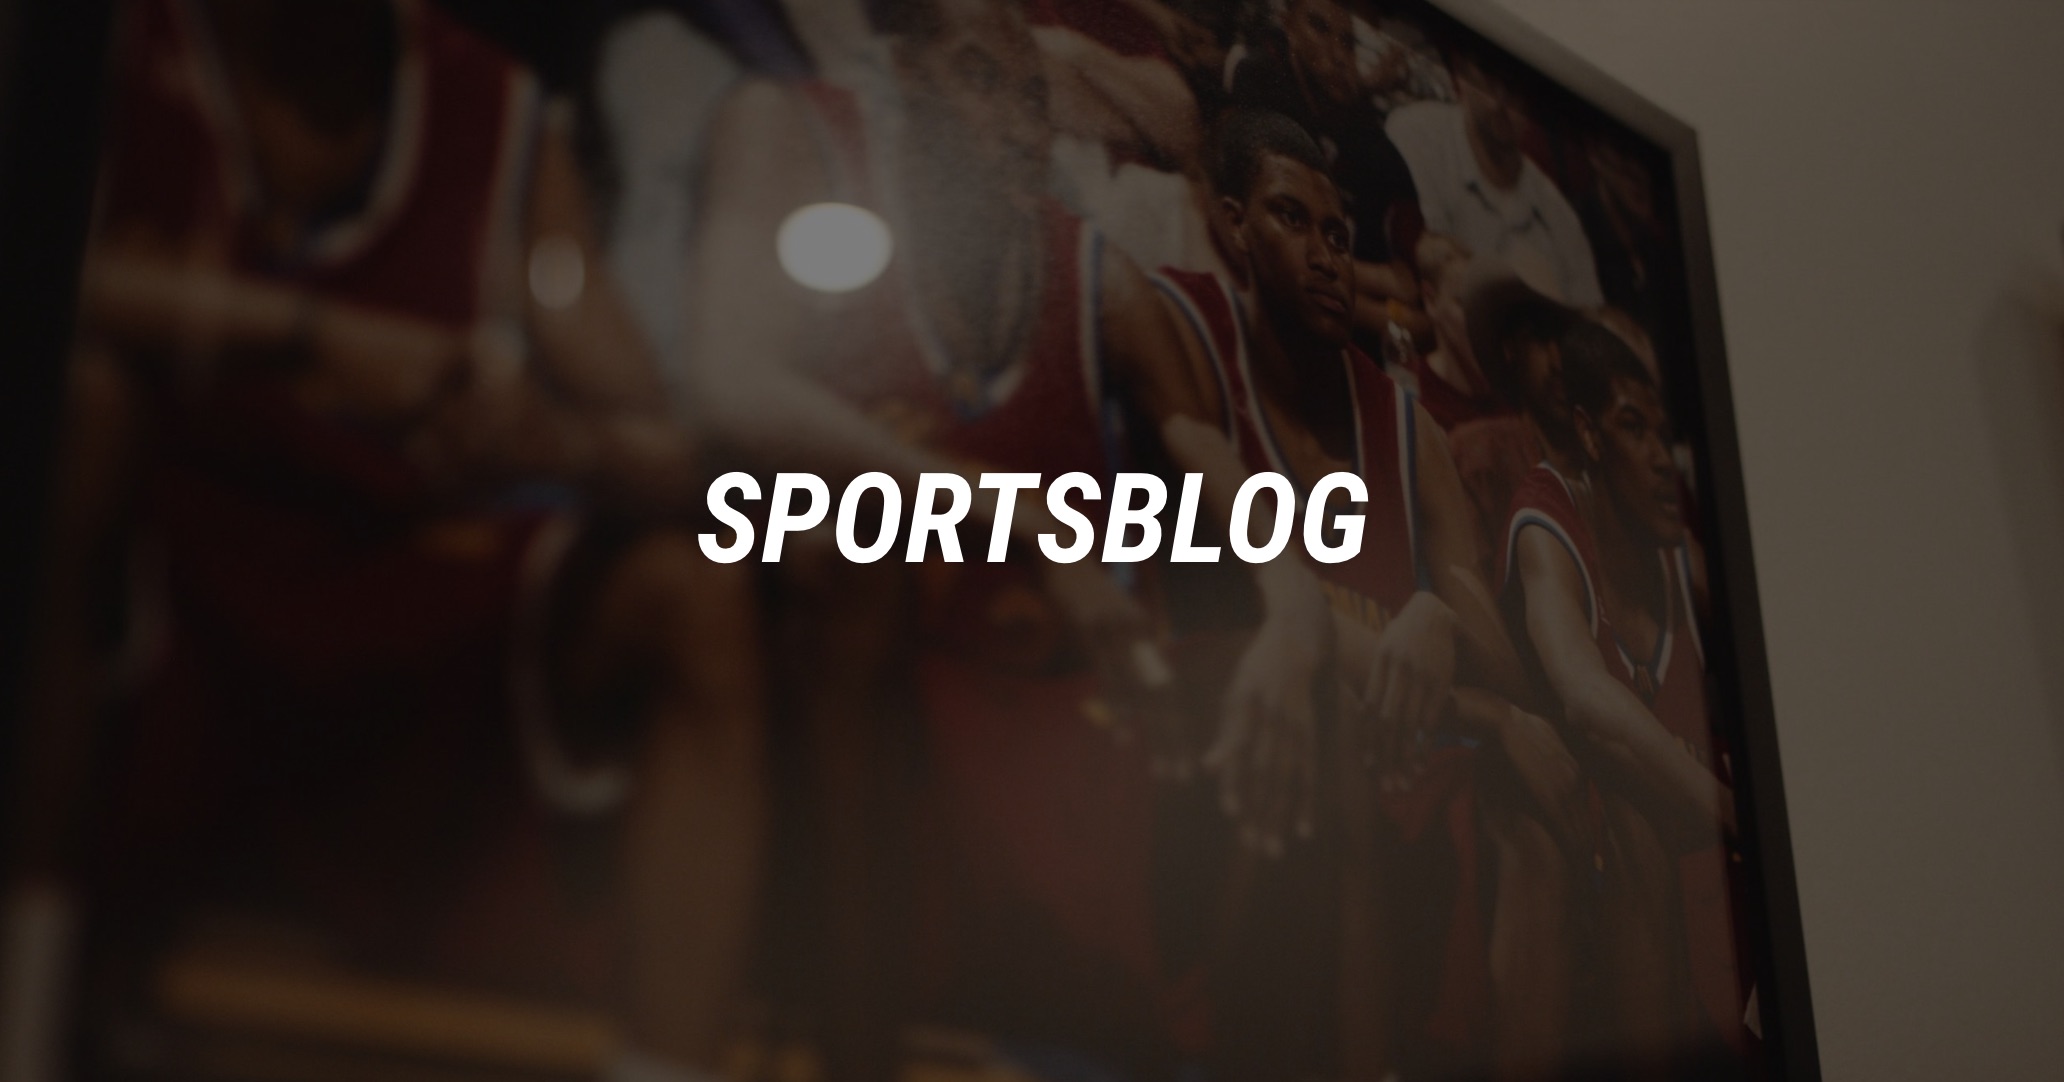 White Sportsblog logo, a documentary mini series with background of a photo showing basketball players wearing red jerseys sitting on a bench